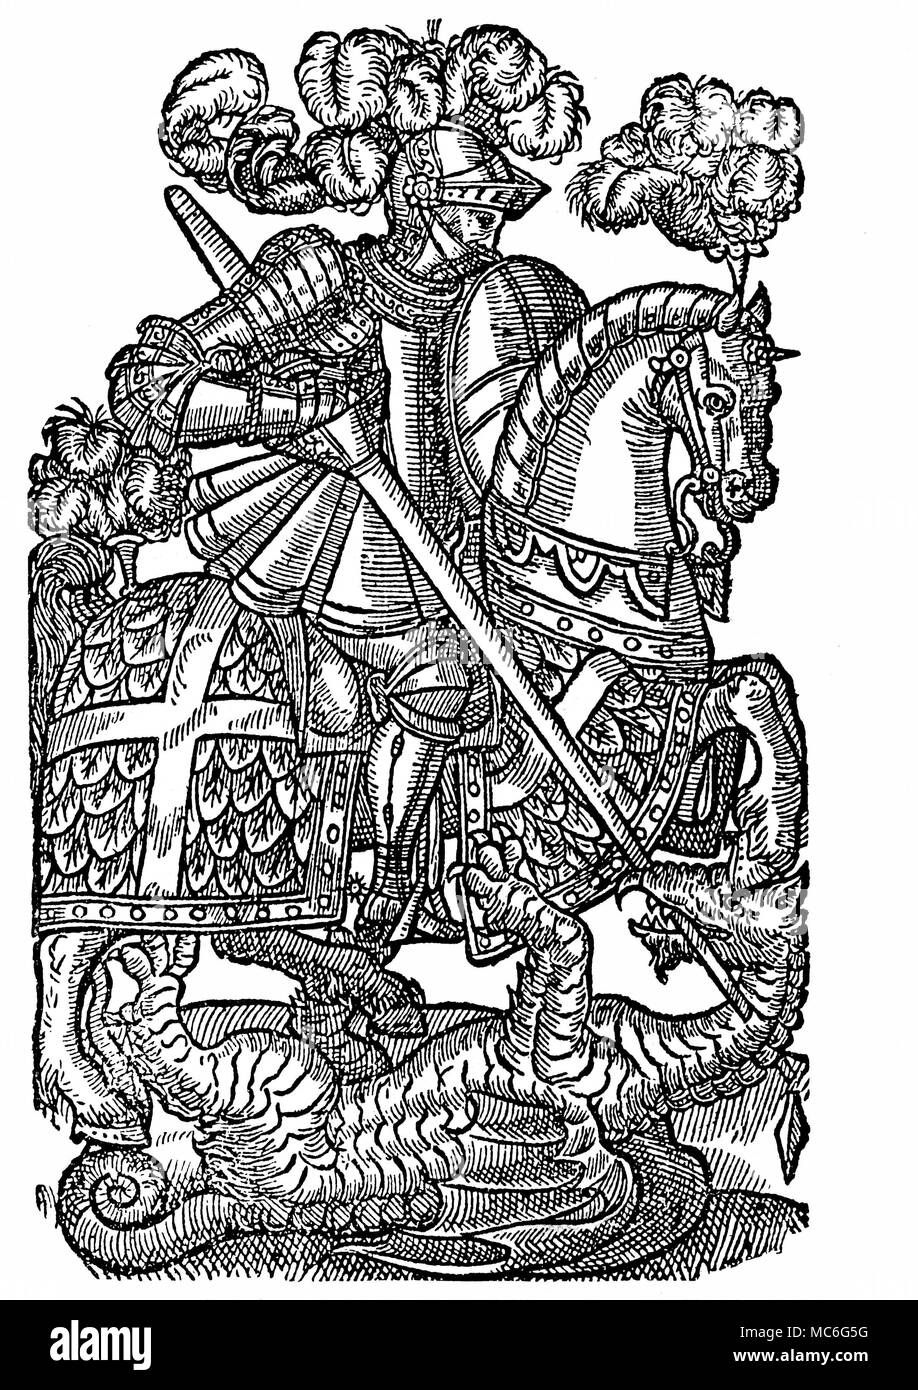 BRITISH MYTHOLOGY - THE RED CROSS KNIGHT The Red Cross Knight, spearing the dragon. From Spenser's Faerie Queen, 1598. From John Richard Green, A Short History of the English People, 1902 edn. Stock Photo